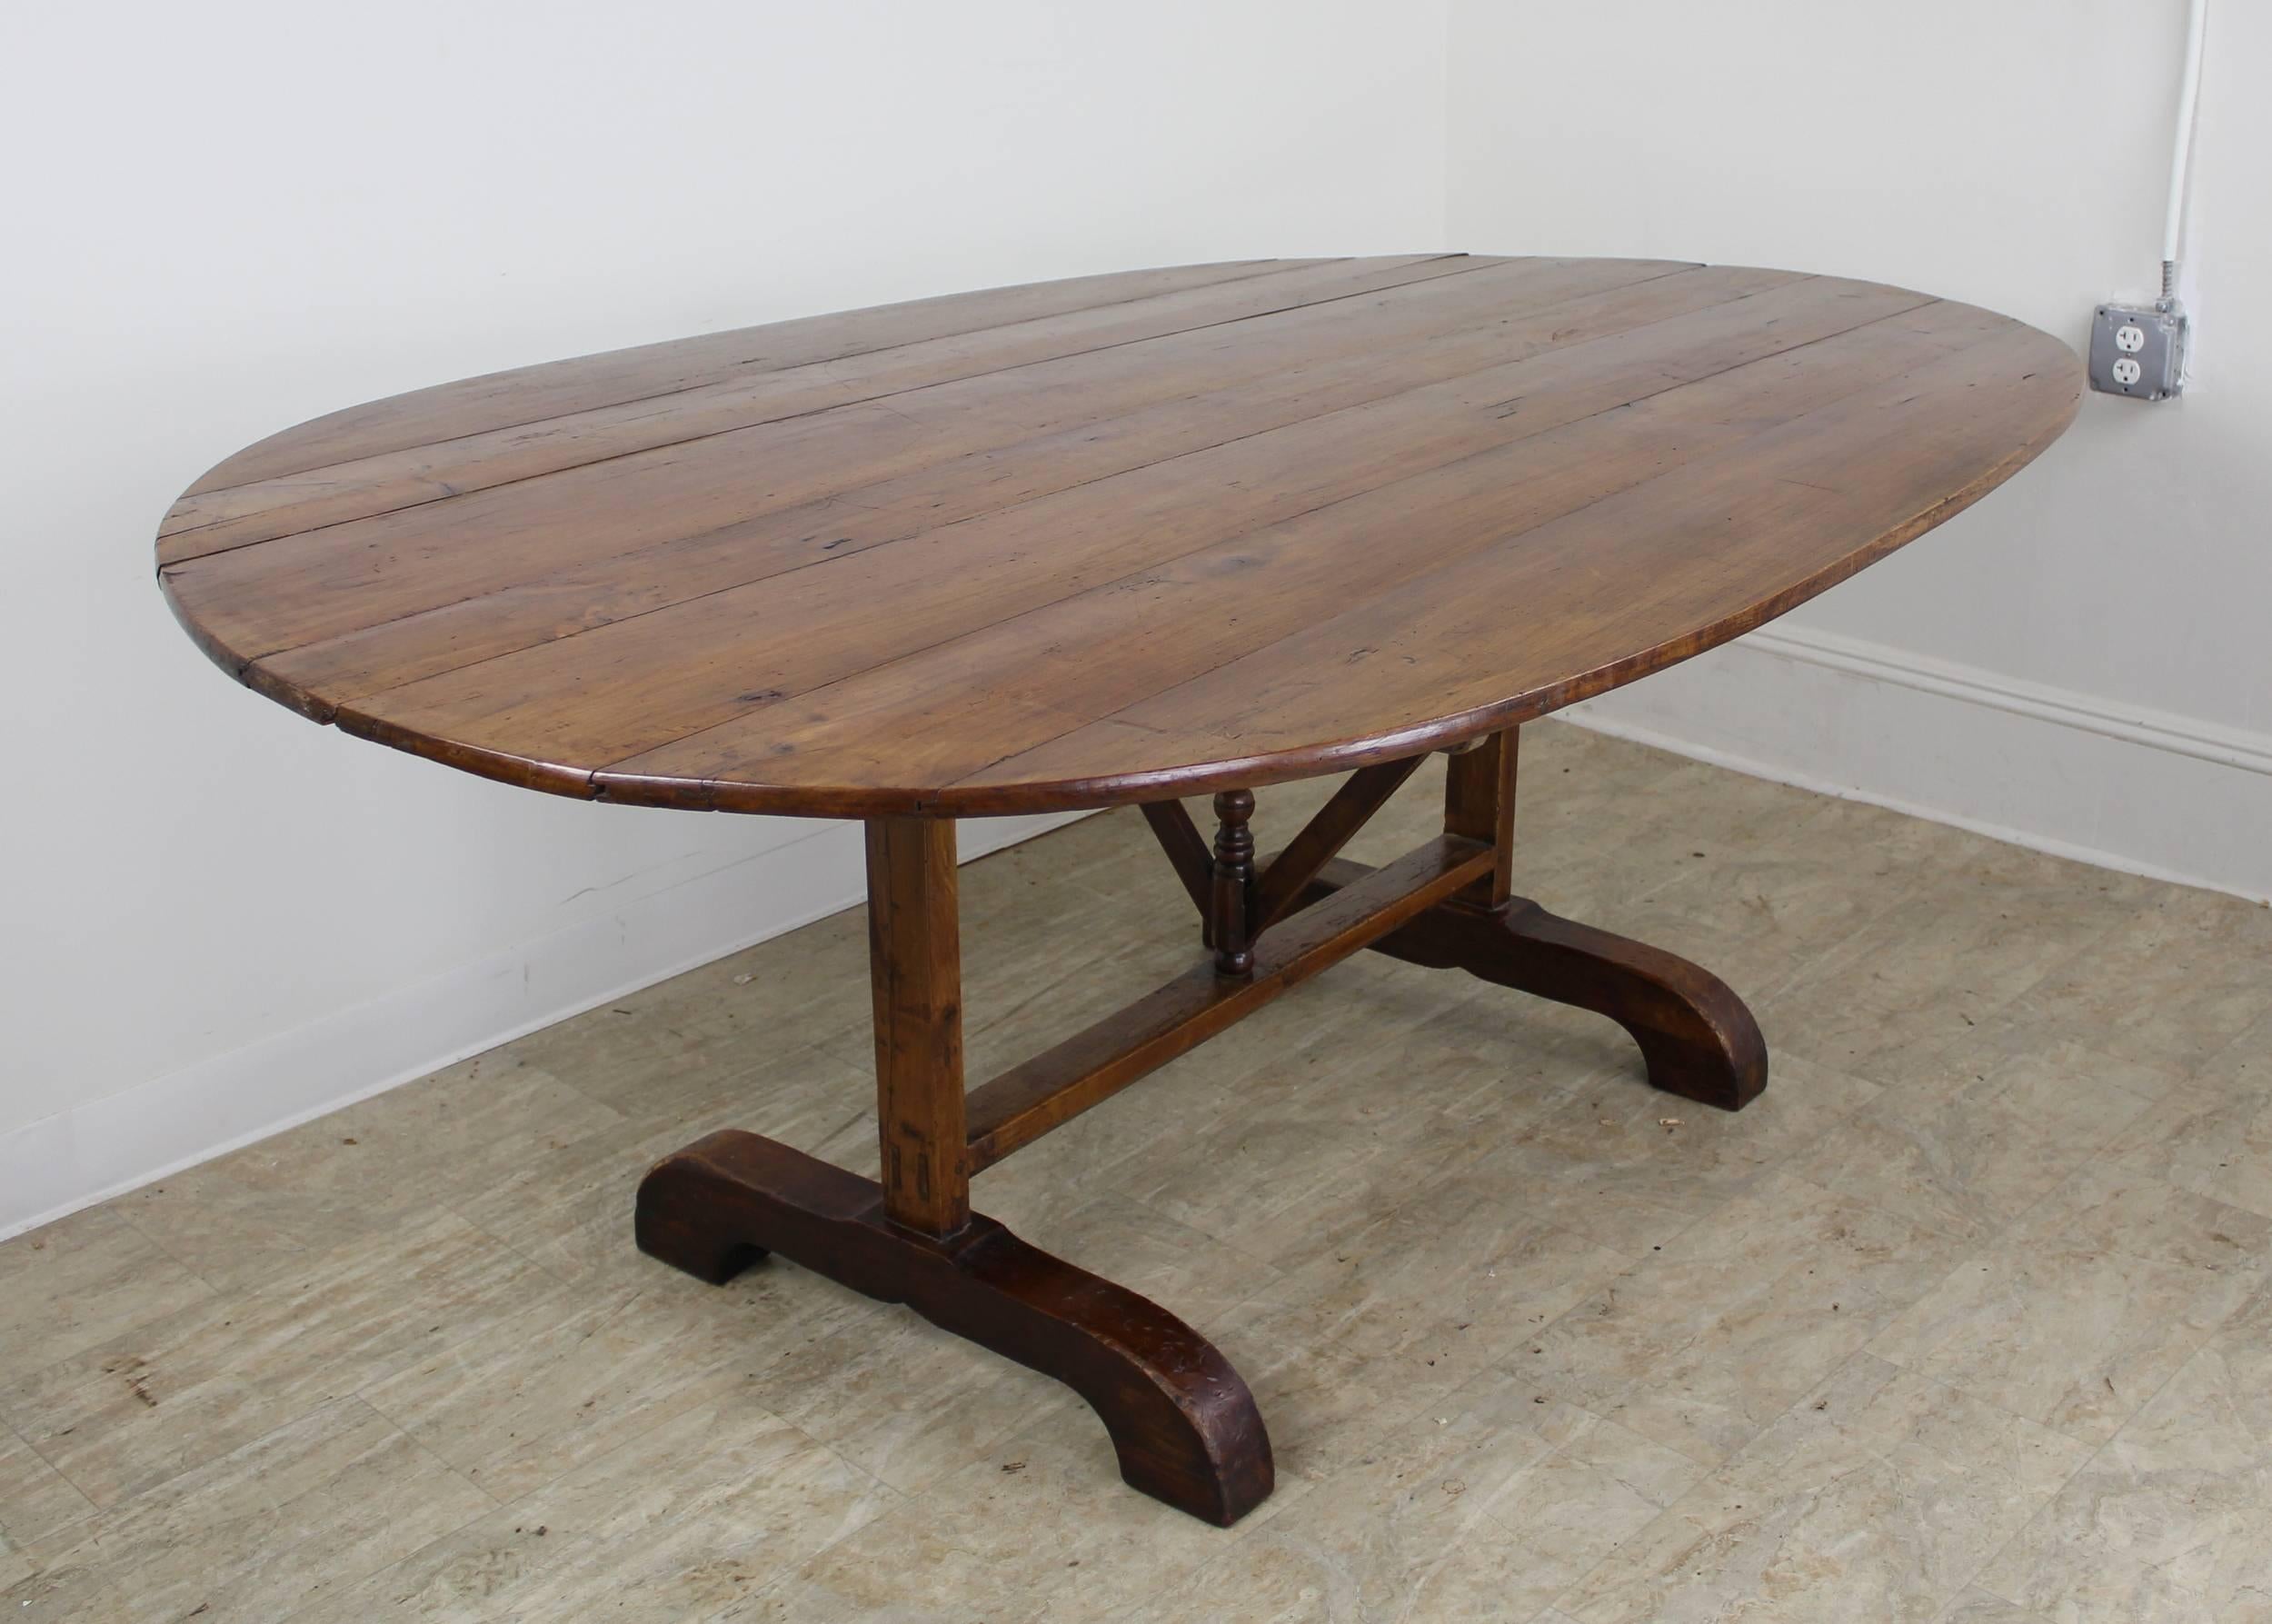 Unusually large wine tasting table from France.  This is a most attractive oval dining table, with excellent seating capacity.  It has a lovely cherry color with great grain and patina.  If desired it is easily secured in an open position to insure